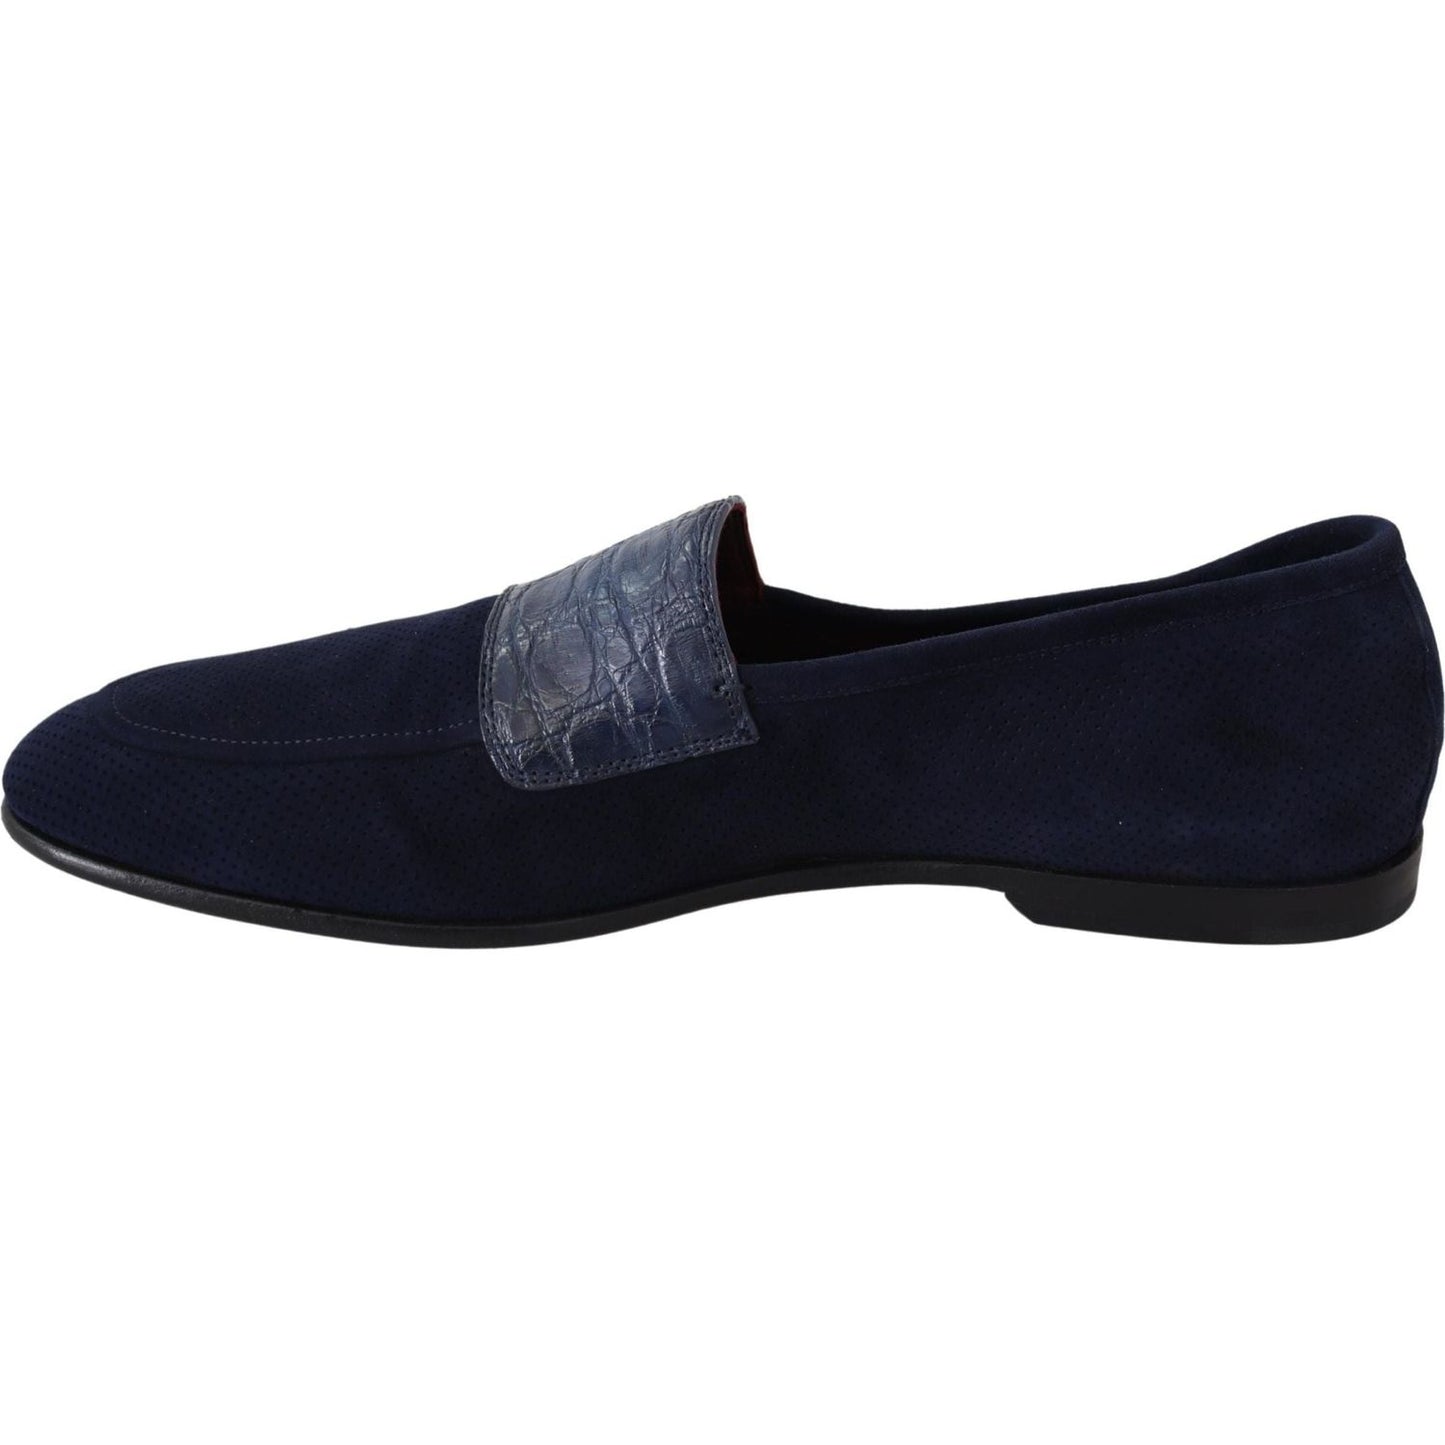 Dolce & Gabbana Elegant Blue Suede Leather Loafers blue-suede-caiman-loafers-slippers-shoes IMG_1583-scaled-c3a5a912-d48.jpg